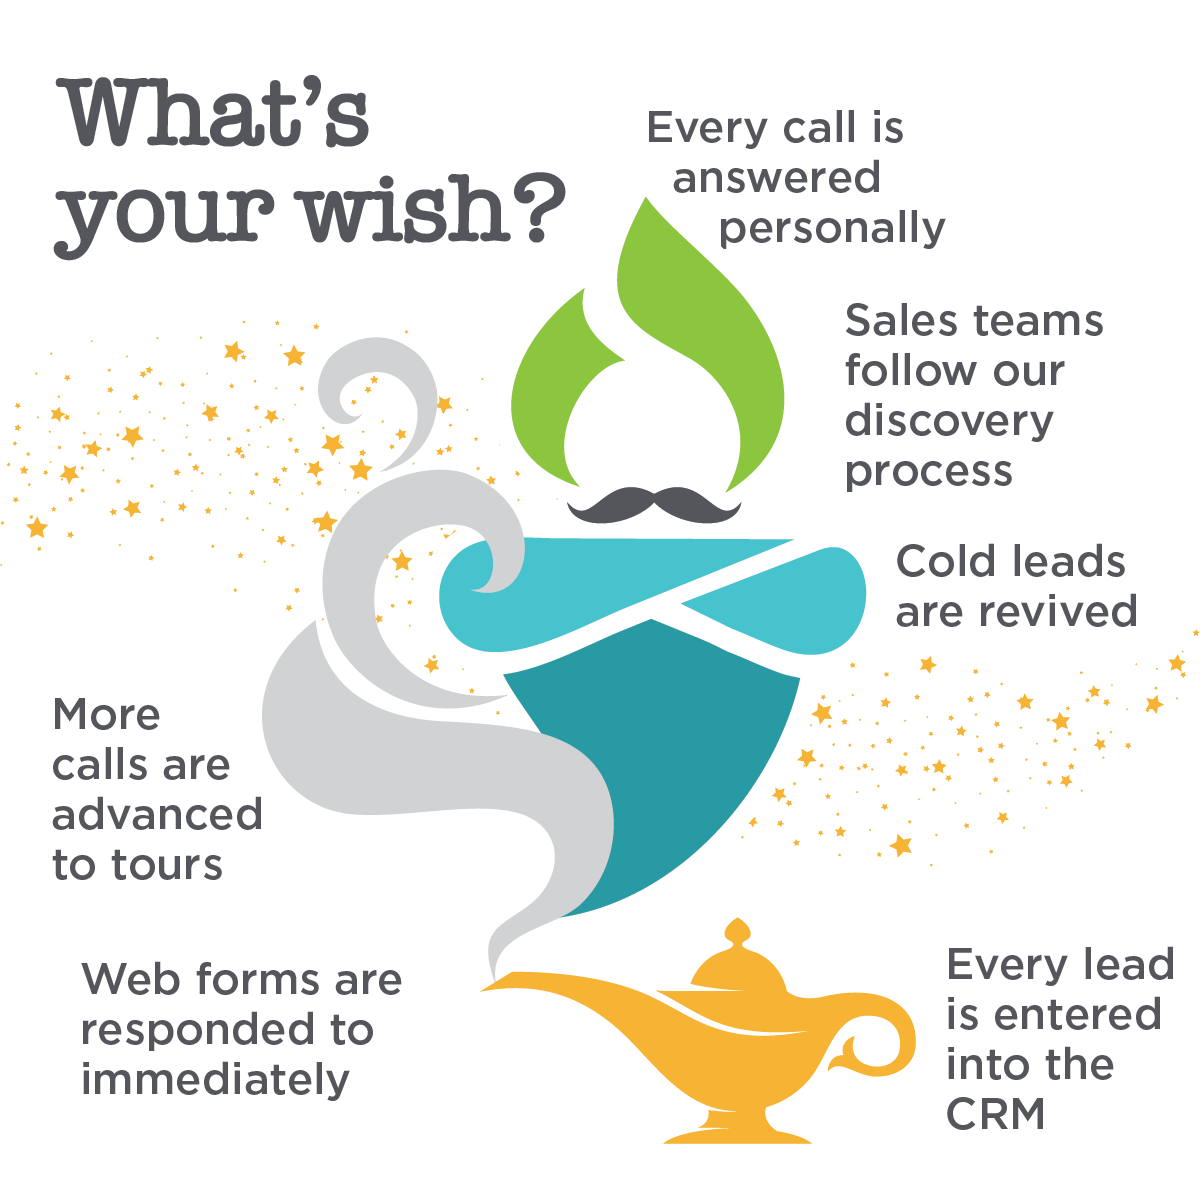 Illustration of a magic lamp with a genie's smoke forming a checklist of sales and customer relationship management (CRM) services for a senior living call center, surrounded by sparkles.